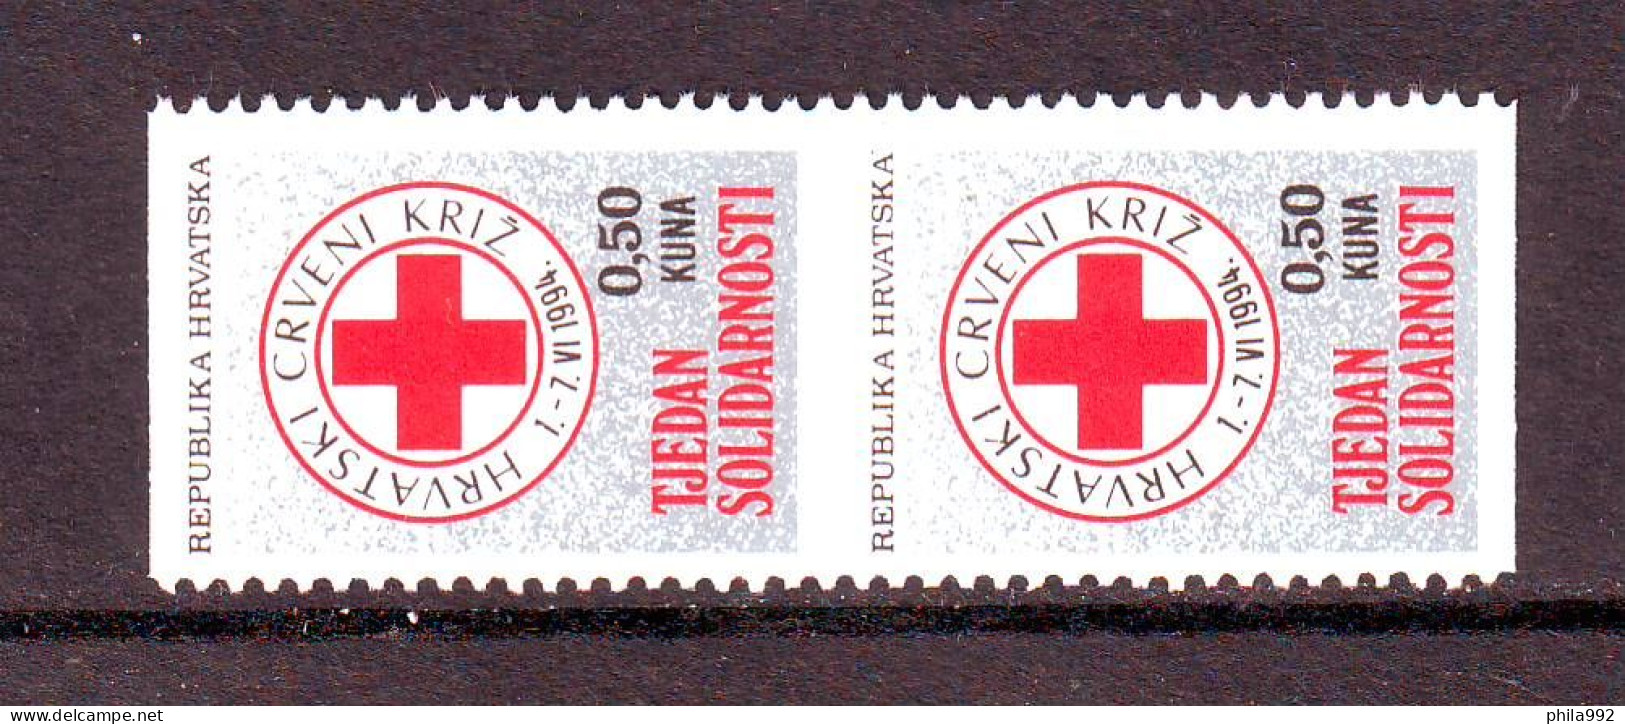 Croatia 1994 Charity Stamp Mi.No.34 RED CROSS Solidarity A Pair Without Horizontal Serrations MNH - Croatie